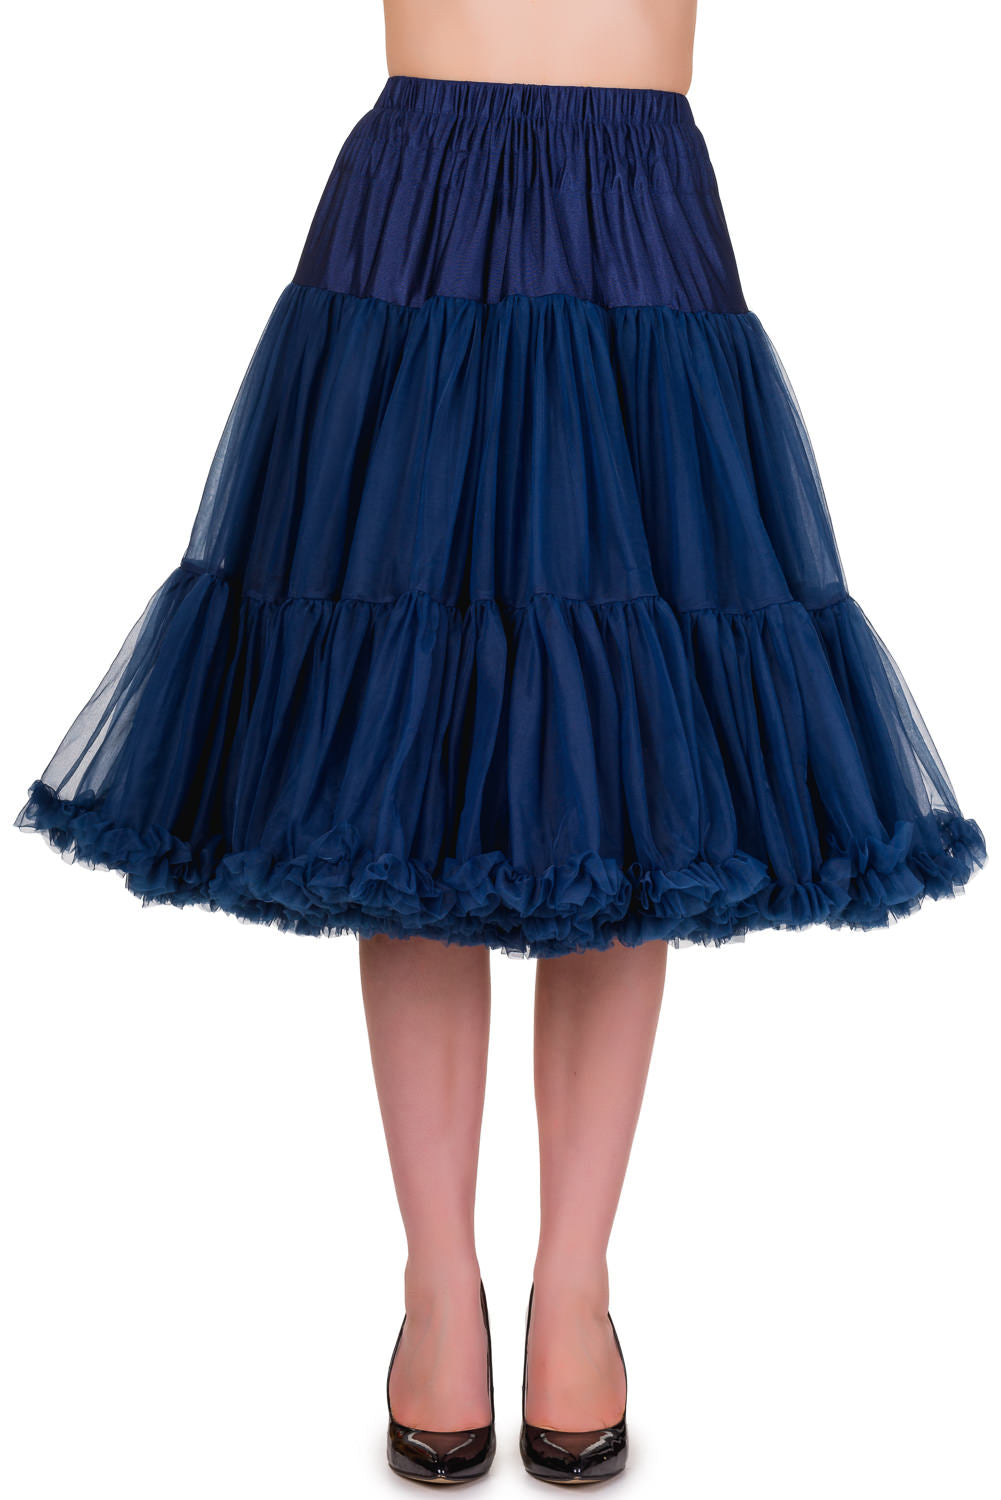 Dancing Days Lifeforms 50s Style 25"-27" Long Petticoat In Navy Blue; Dancing Days; Lifeforms Petticoat; 50s Style; 25"-27" Long Petticoat; Navy Blue; Front View